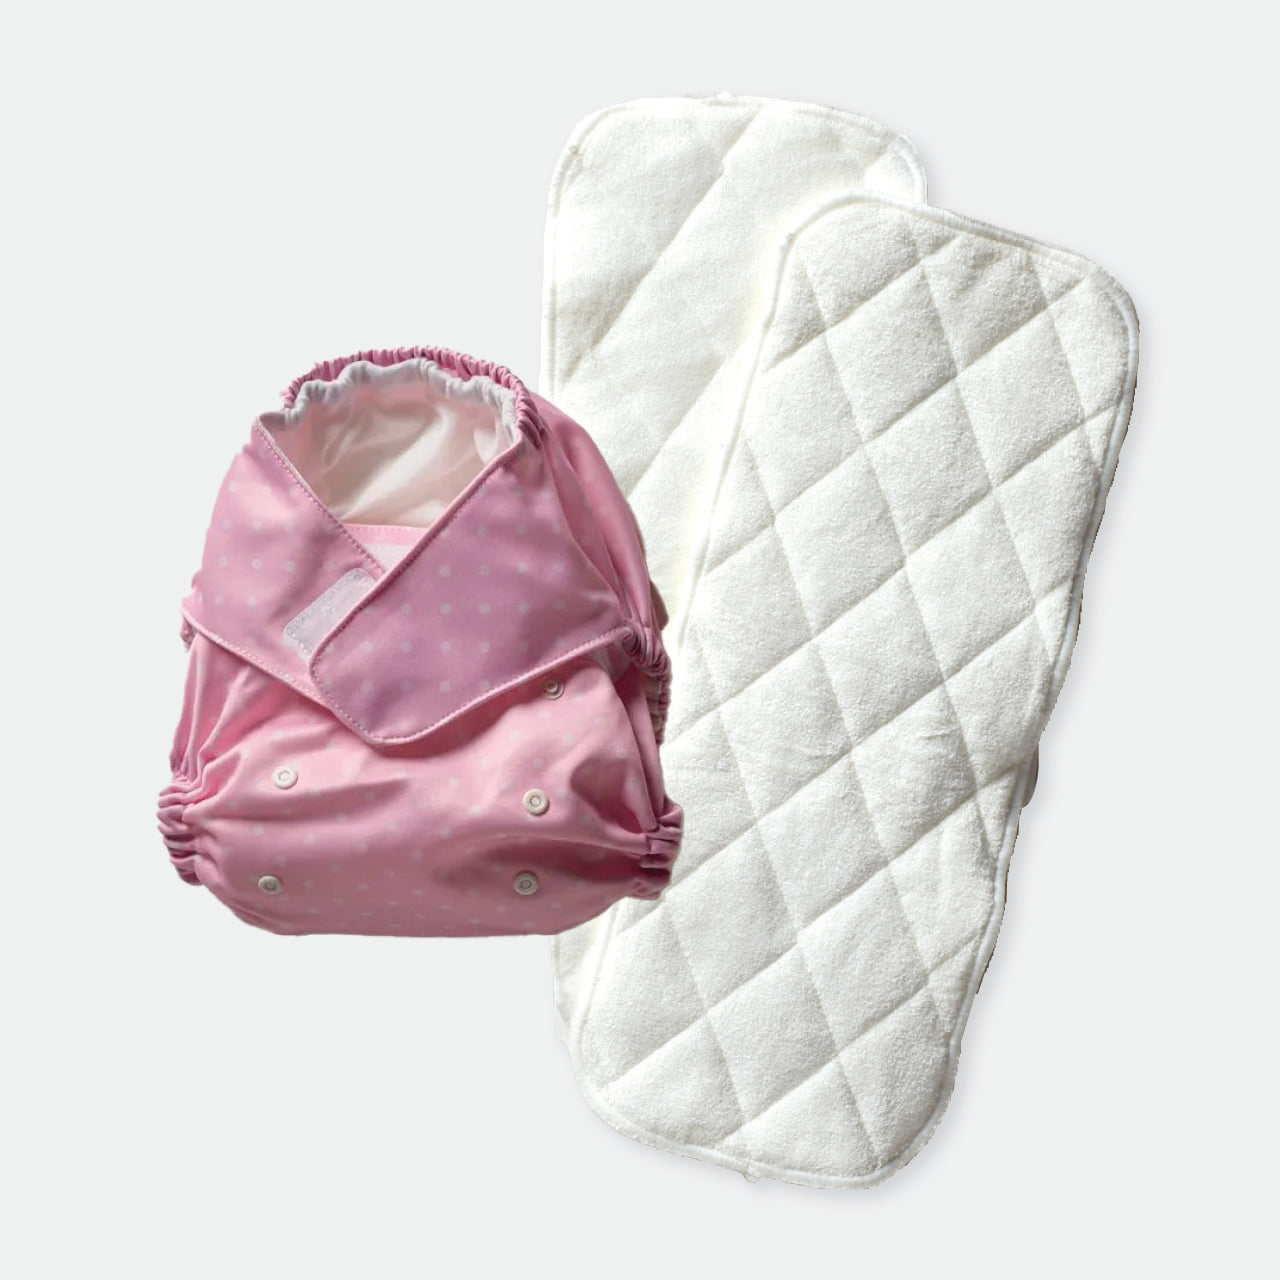 Baby Basics Pink Reusable Nappy and liners on a white background